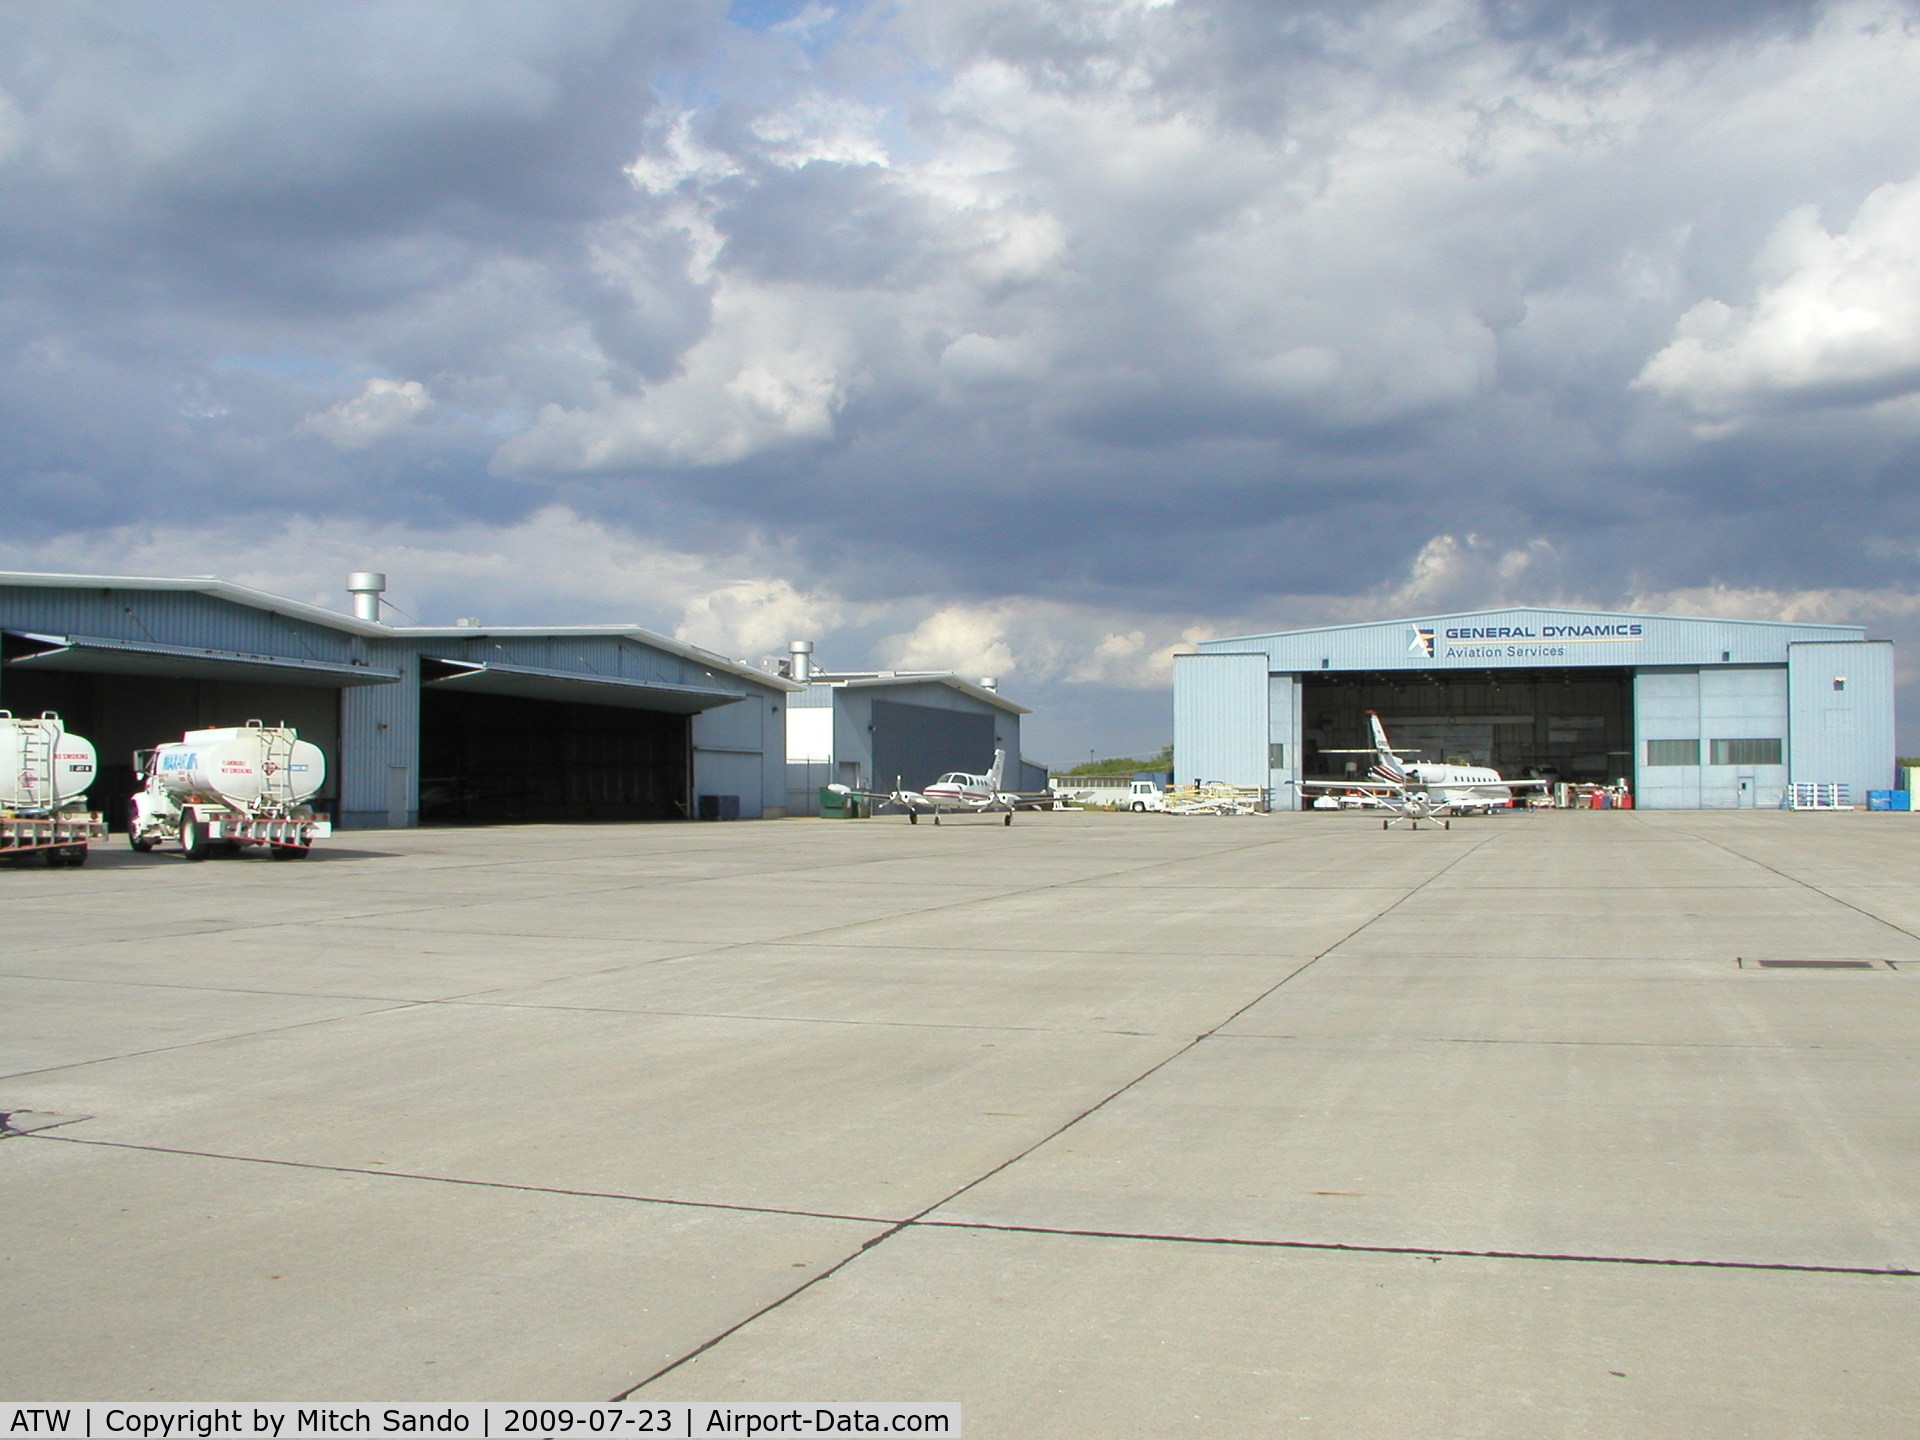 Outagamie County Regional Airport (ATW) - Outagamie County Regional Airport in Appleton, WI.